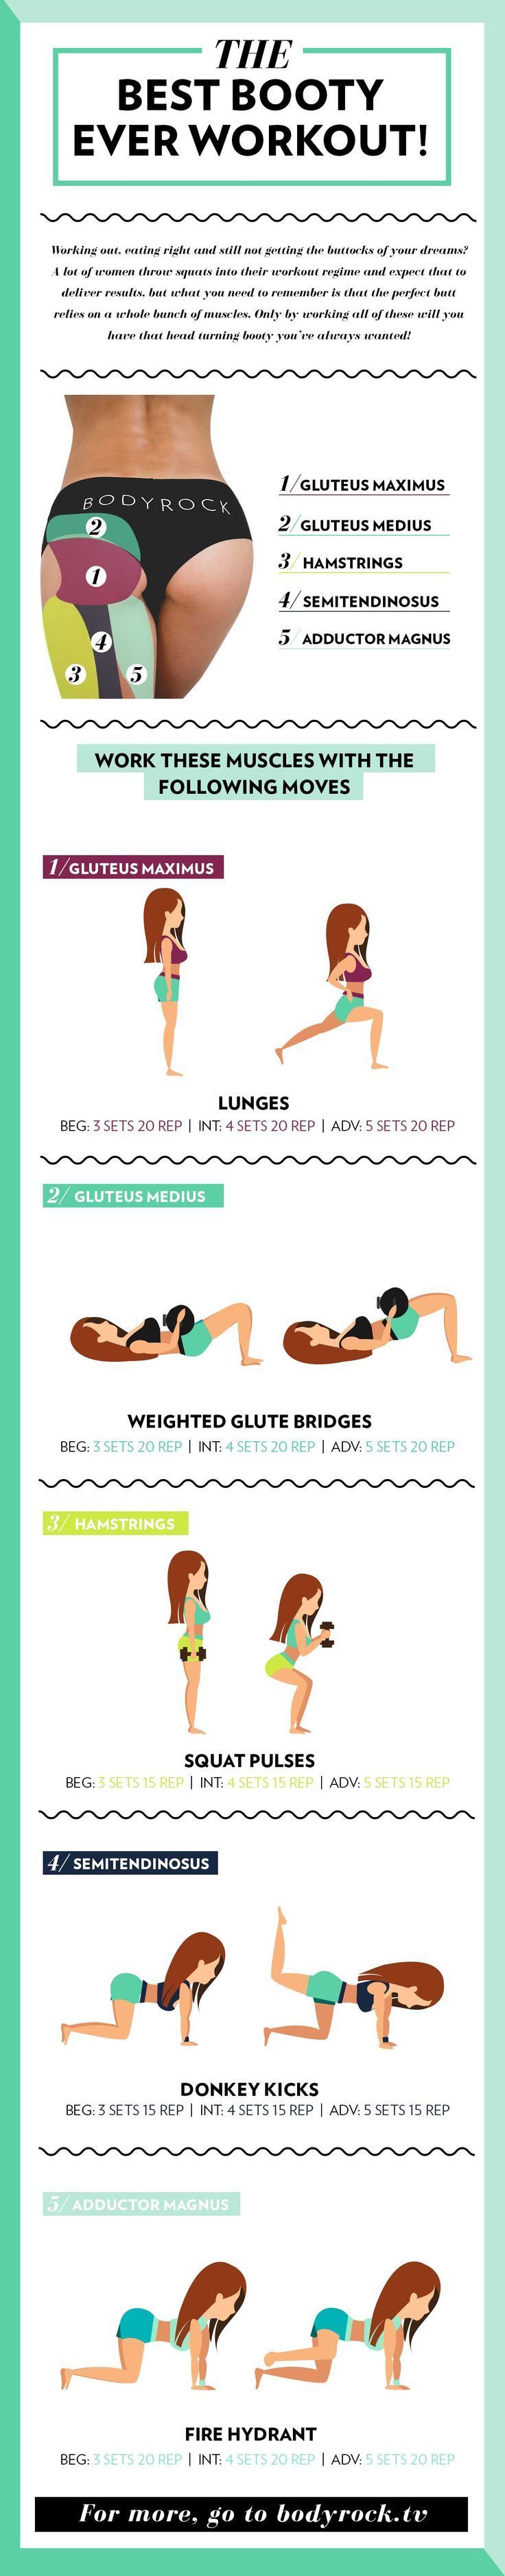 Try this full booty workout, and get the booty of your dreams! For more workouts a